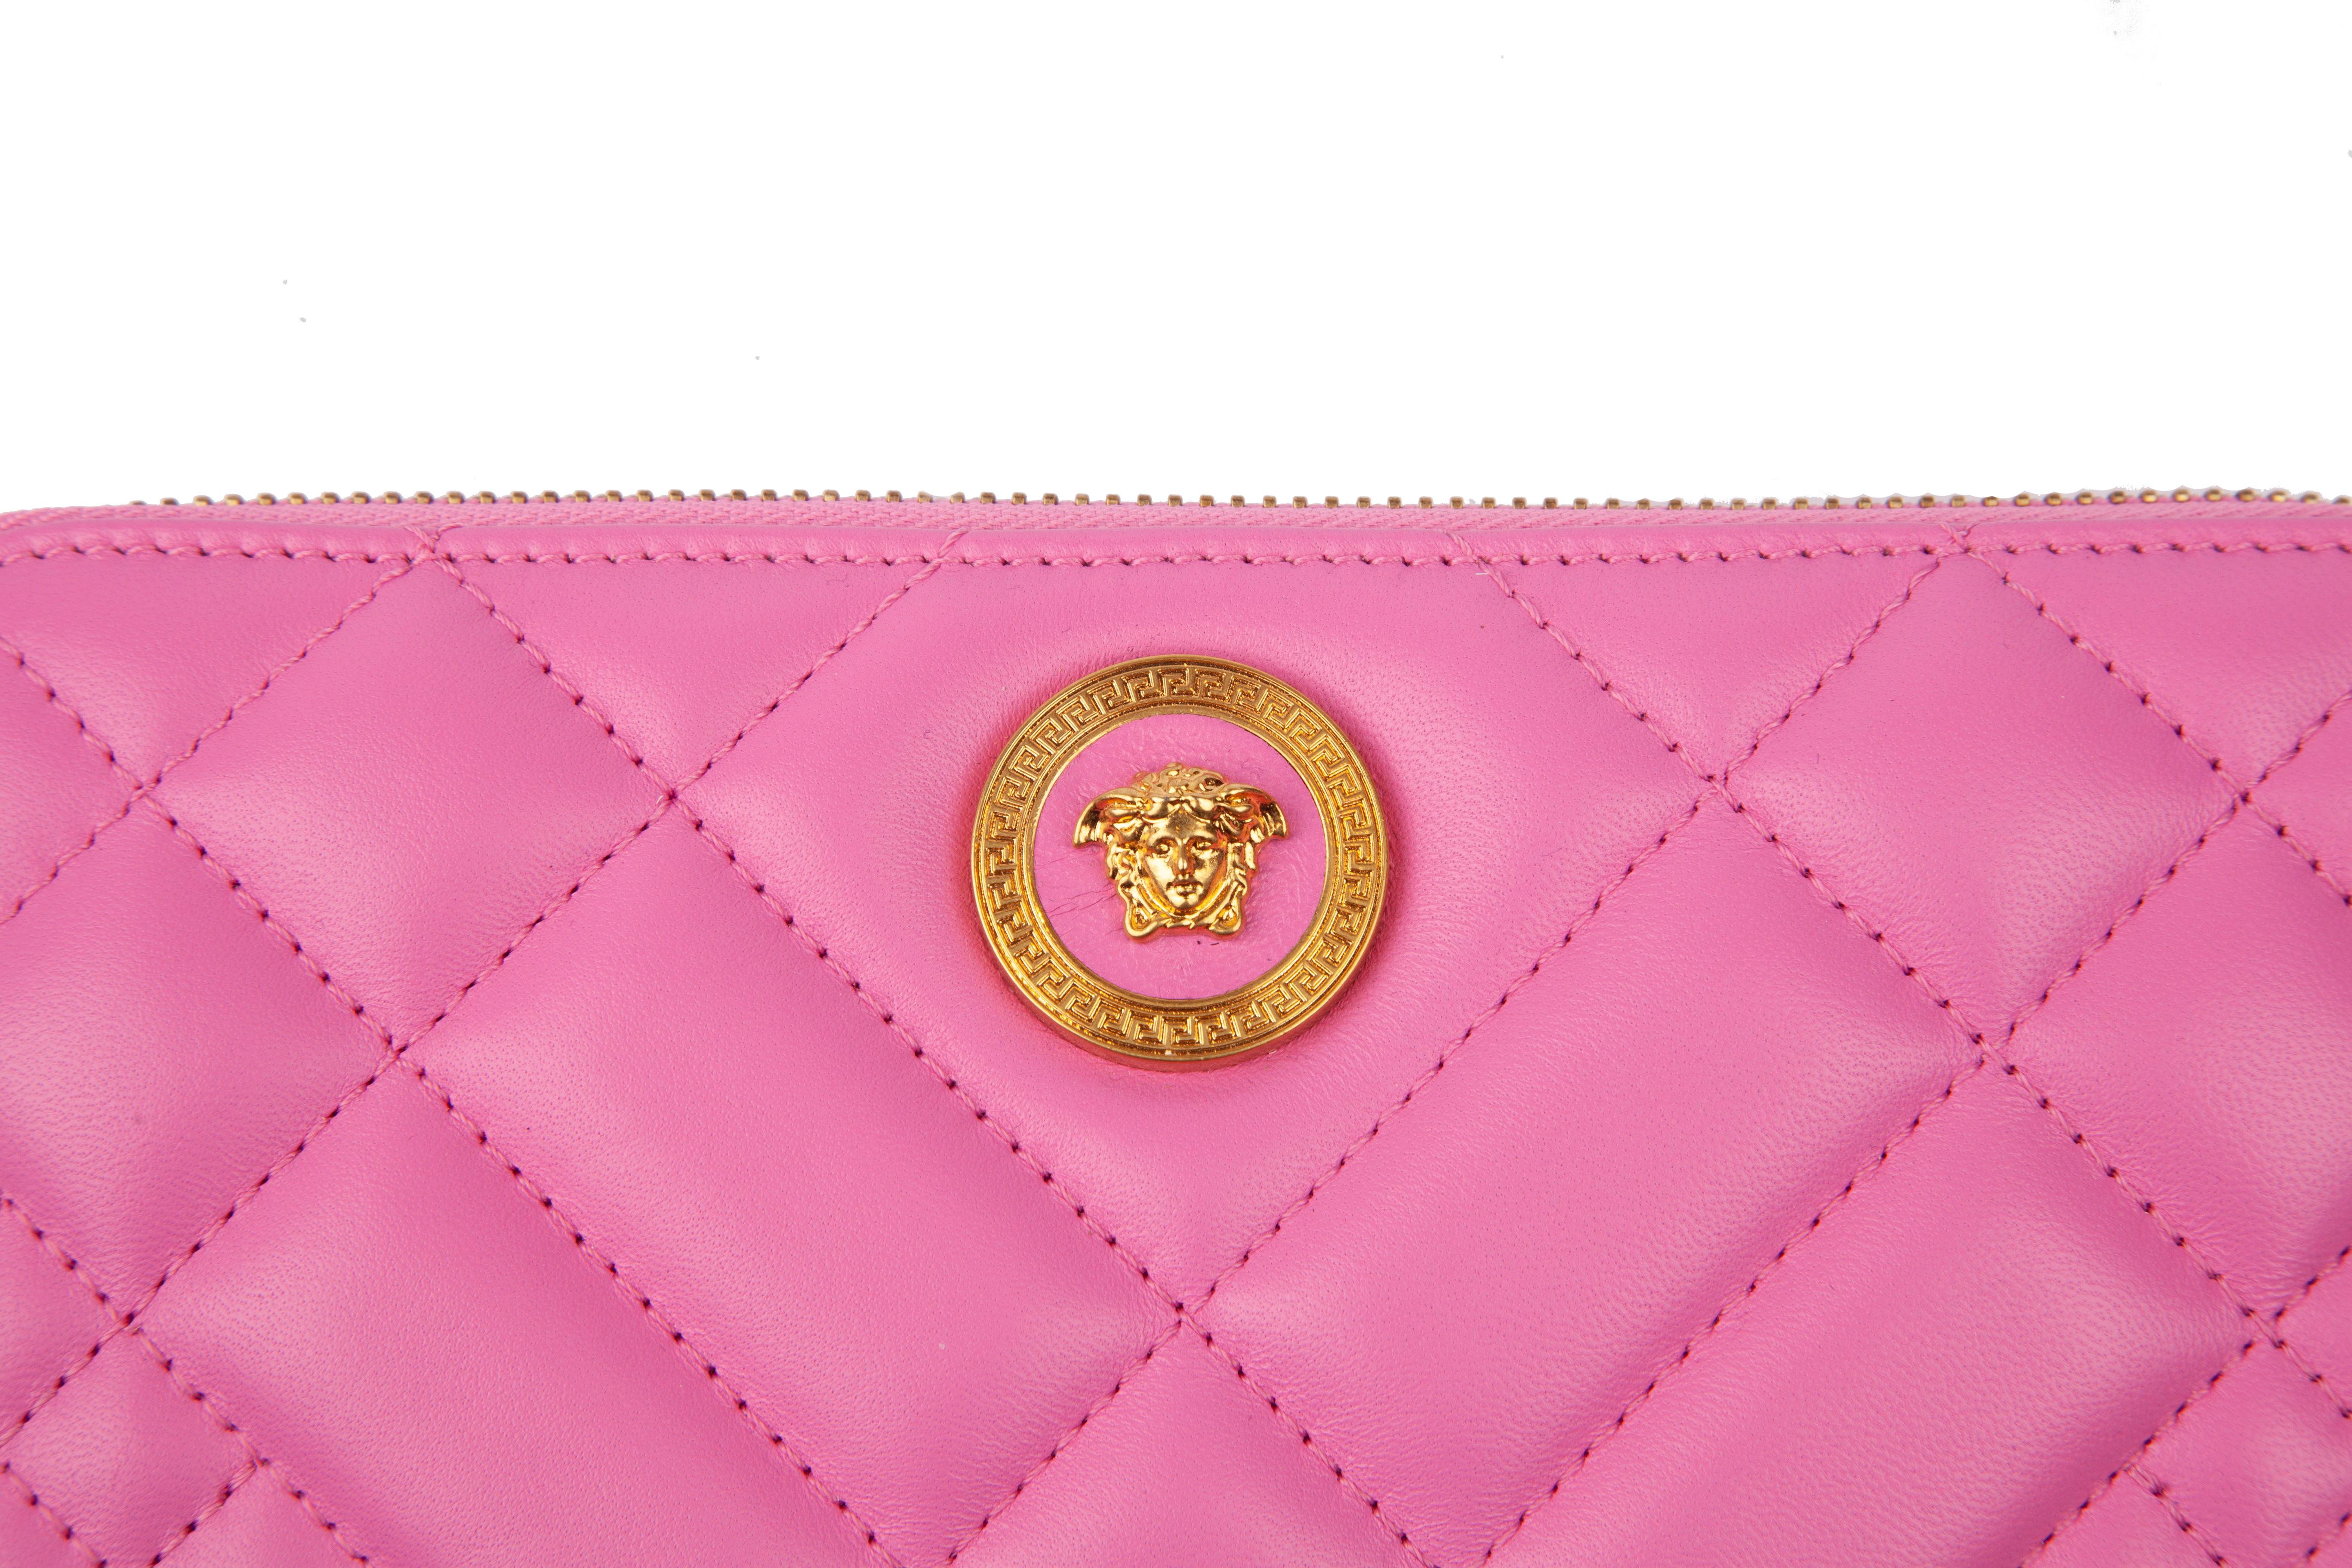 Versace Pink Quilted Icon Zip Around Leather Wallet w/ Gold Tone Medusa Hardware

This Versace quilted icon wallet features pink leather, a zip-around closure, and gold tone medusa medallion. Brand new with tags, however this was the display model.